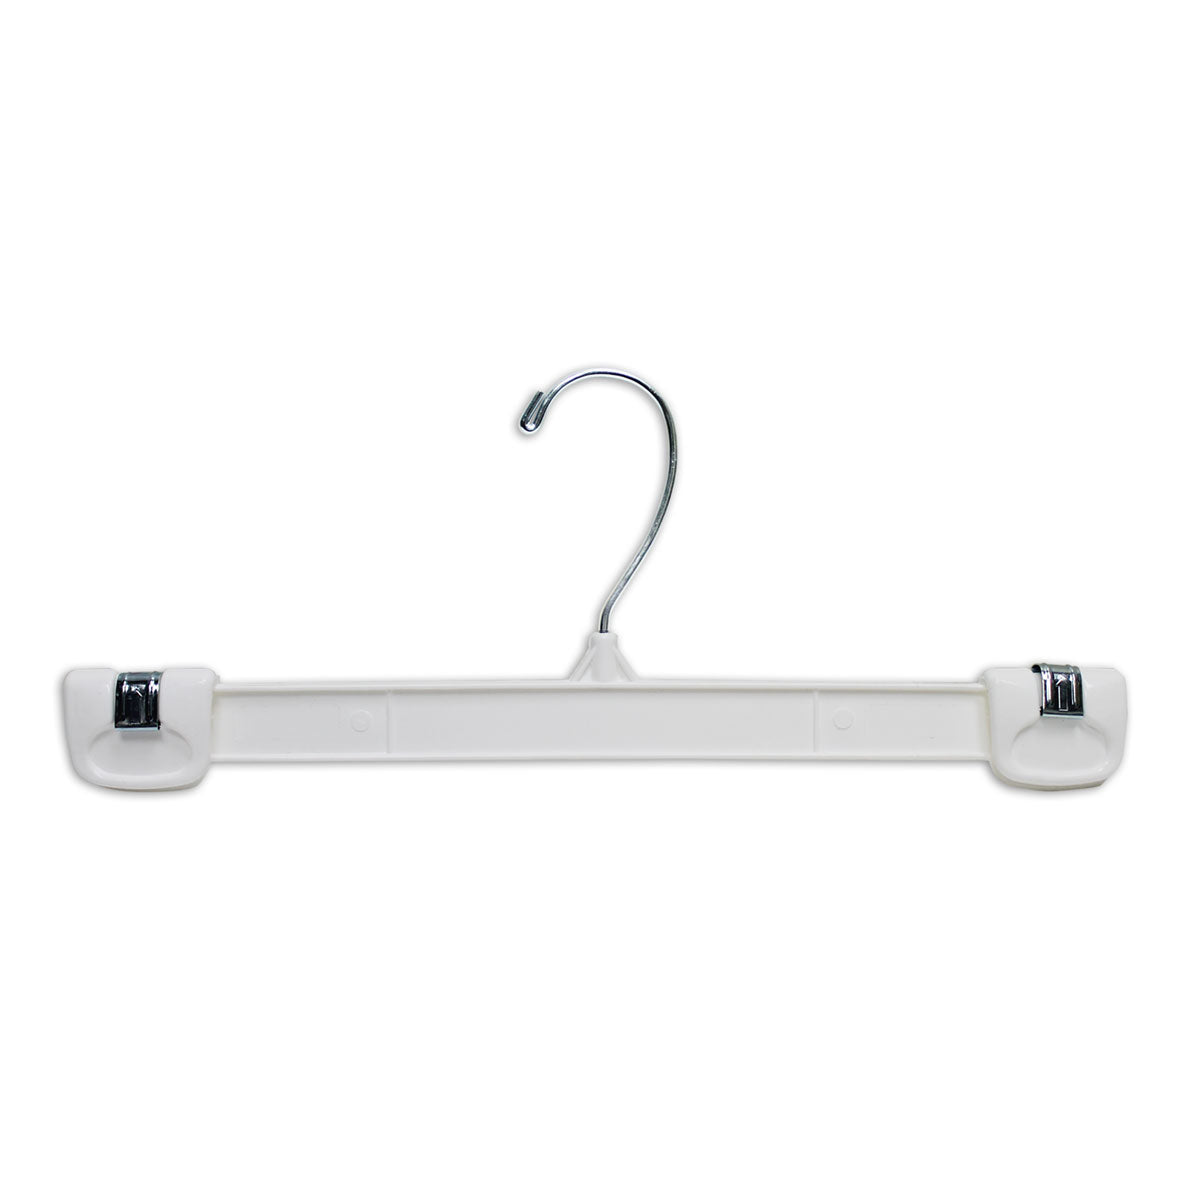 12 White Wooden Children's Hanger with Chrome Pant Clips